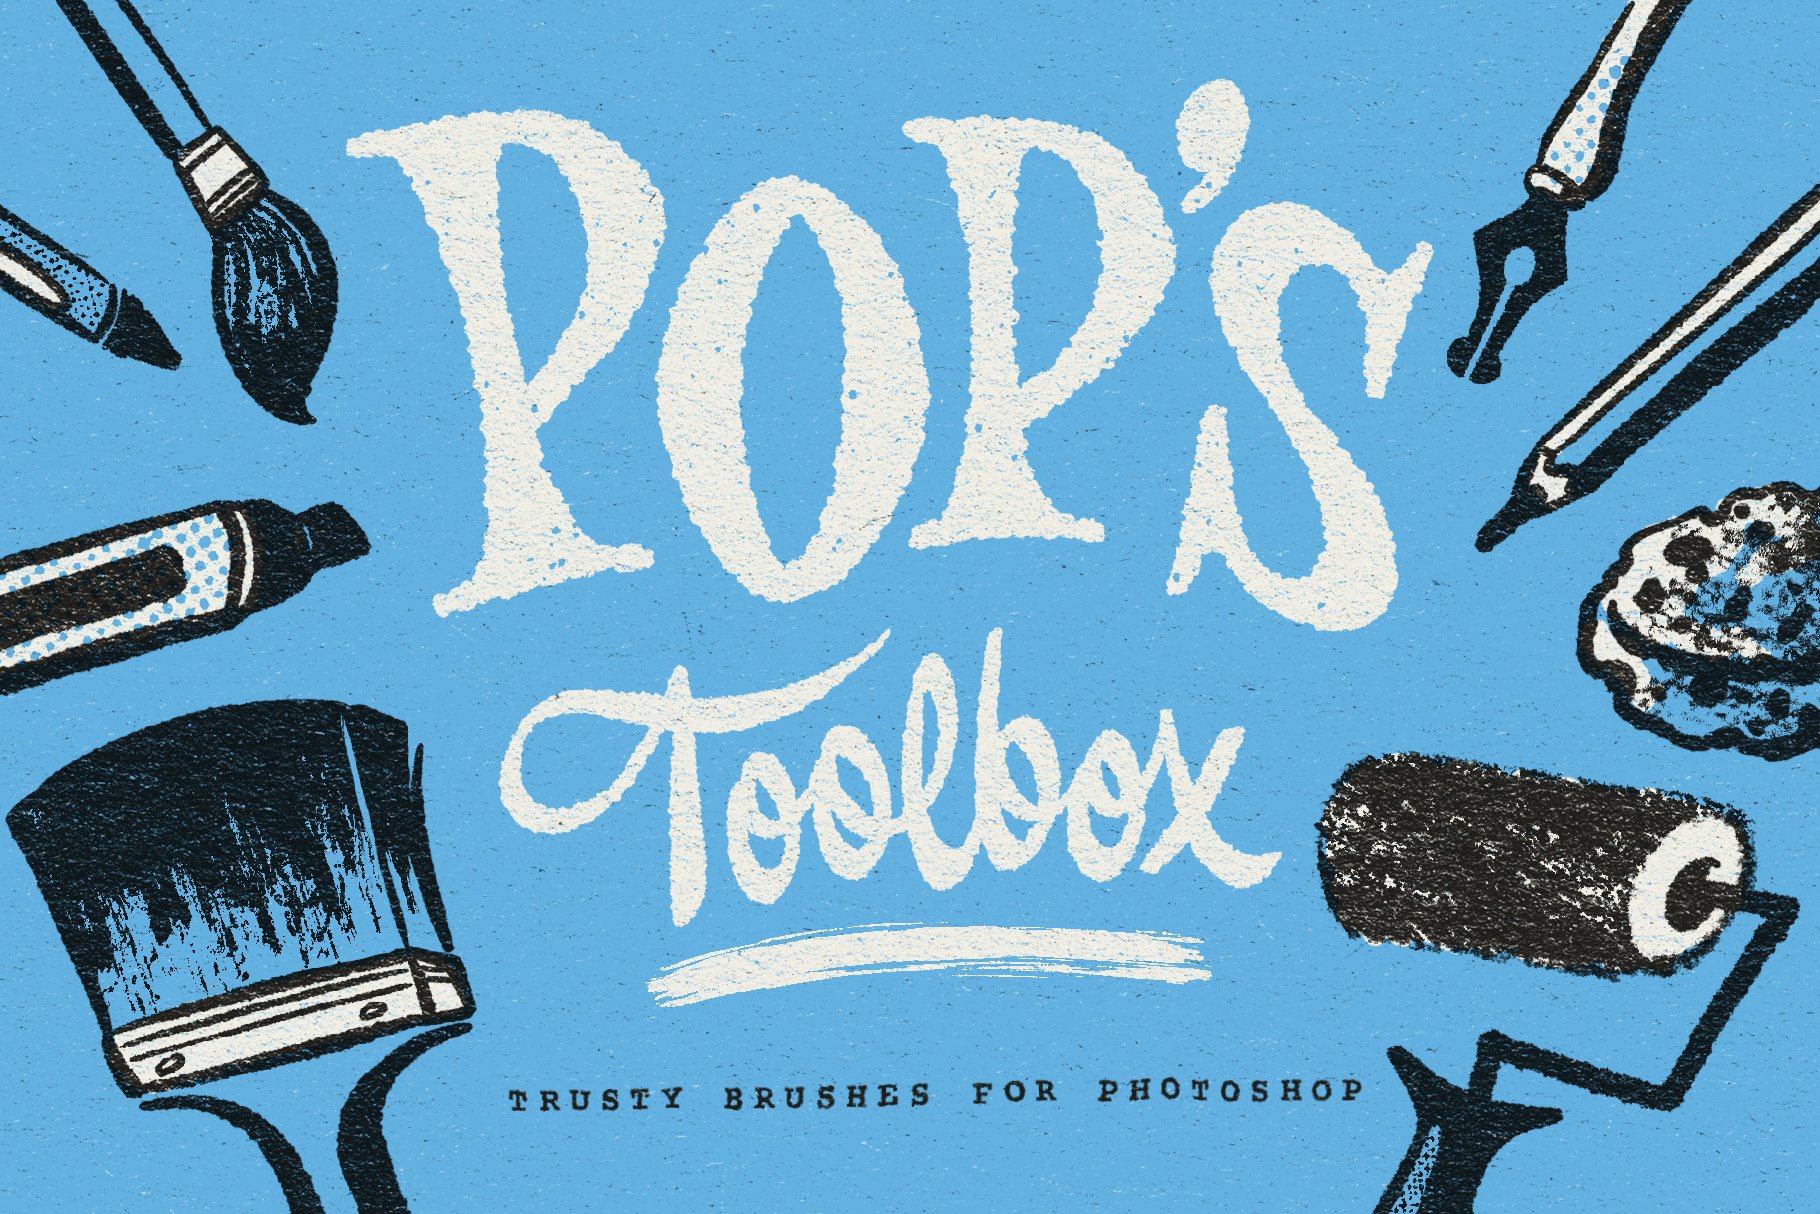 Pop's Toolbox for Photoshopcover image.